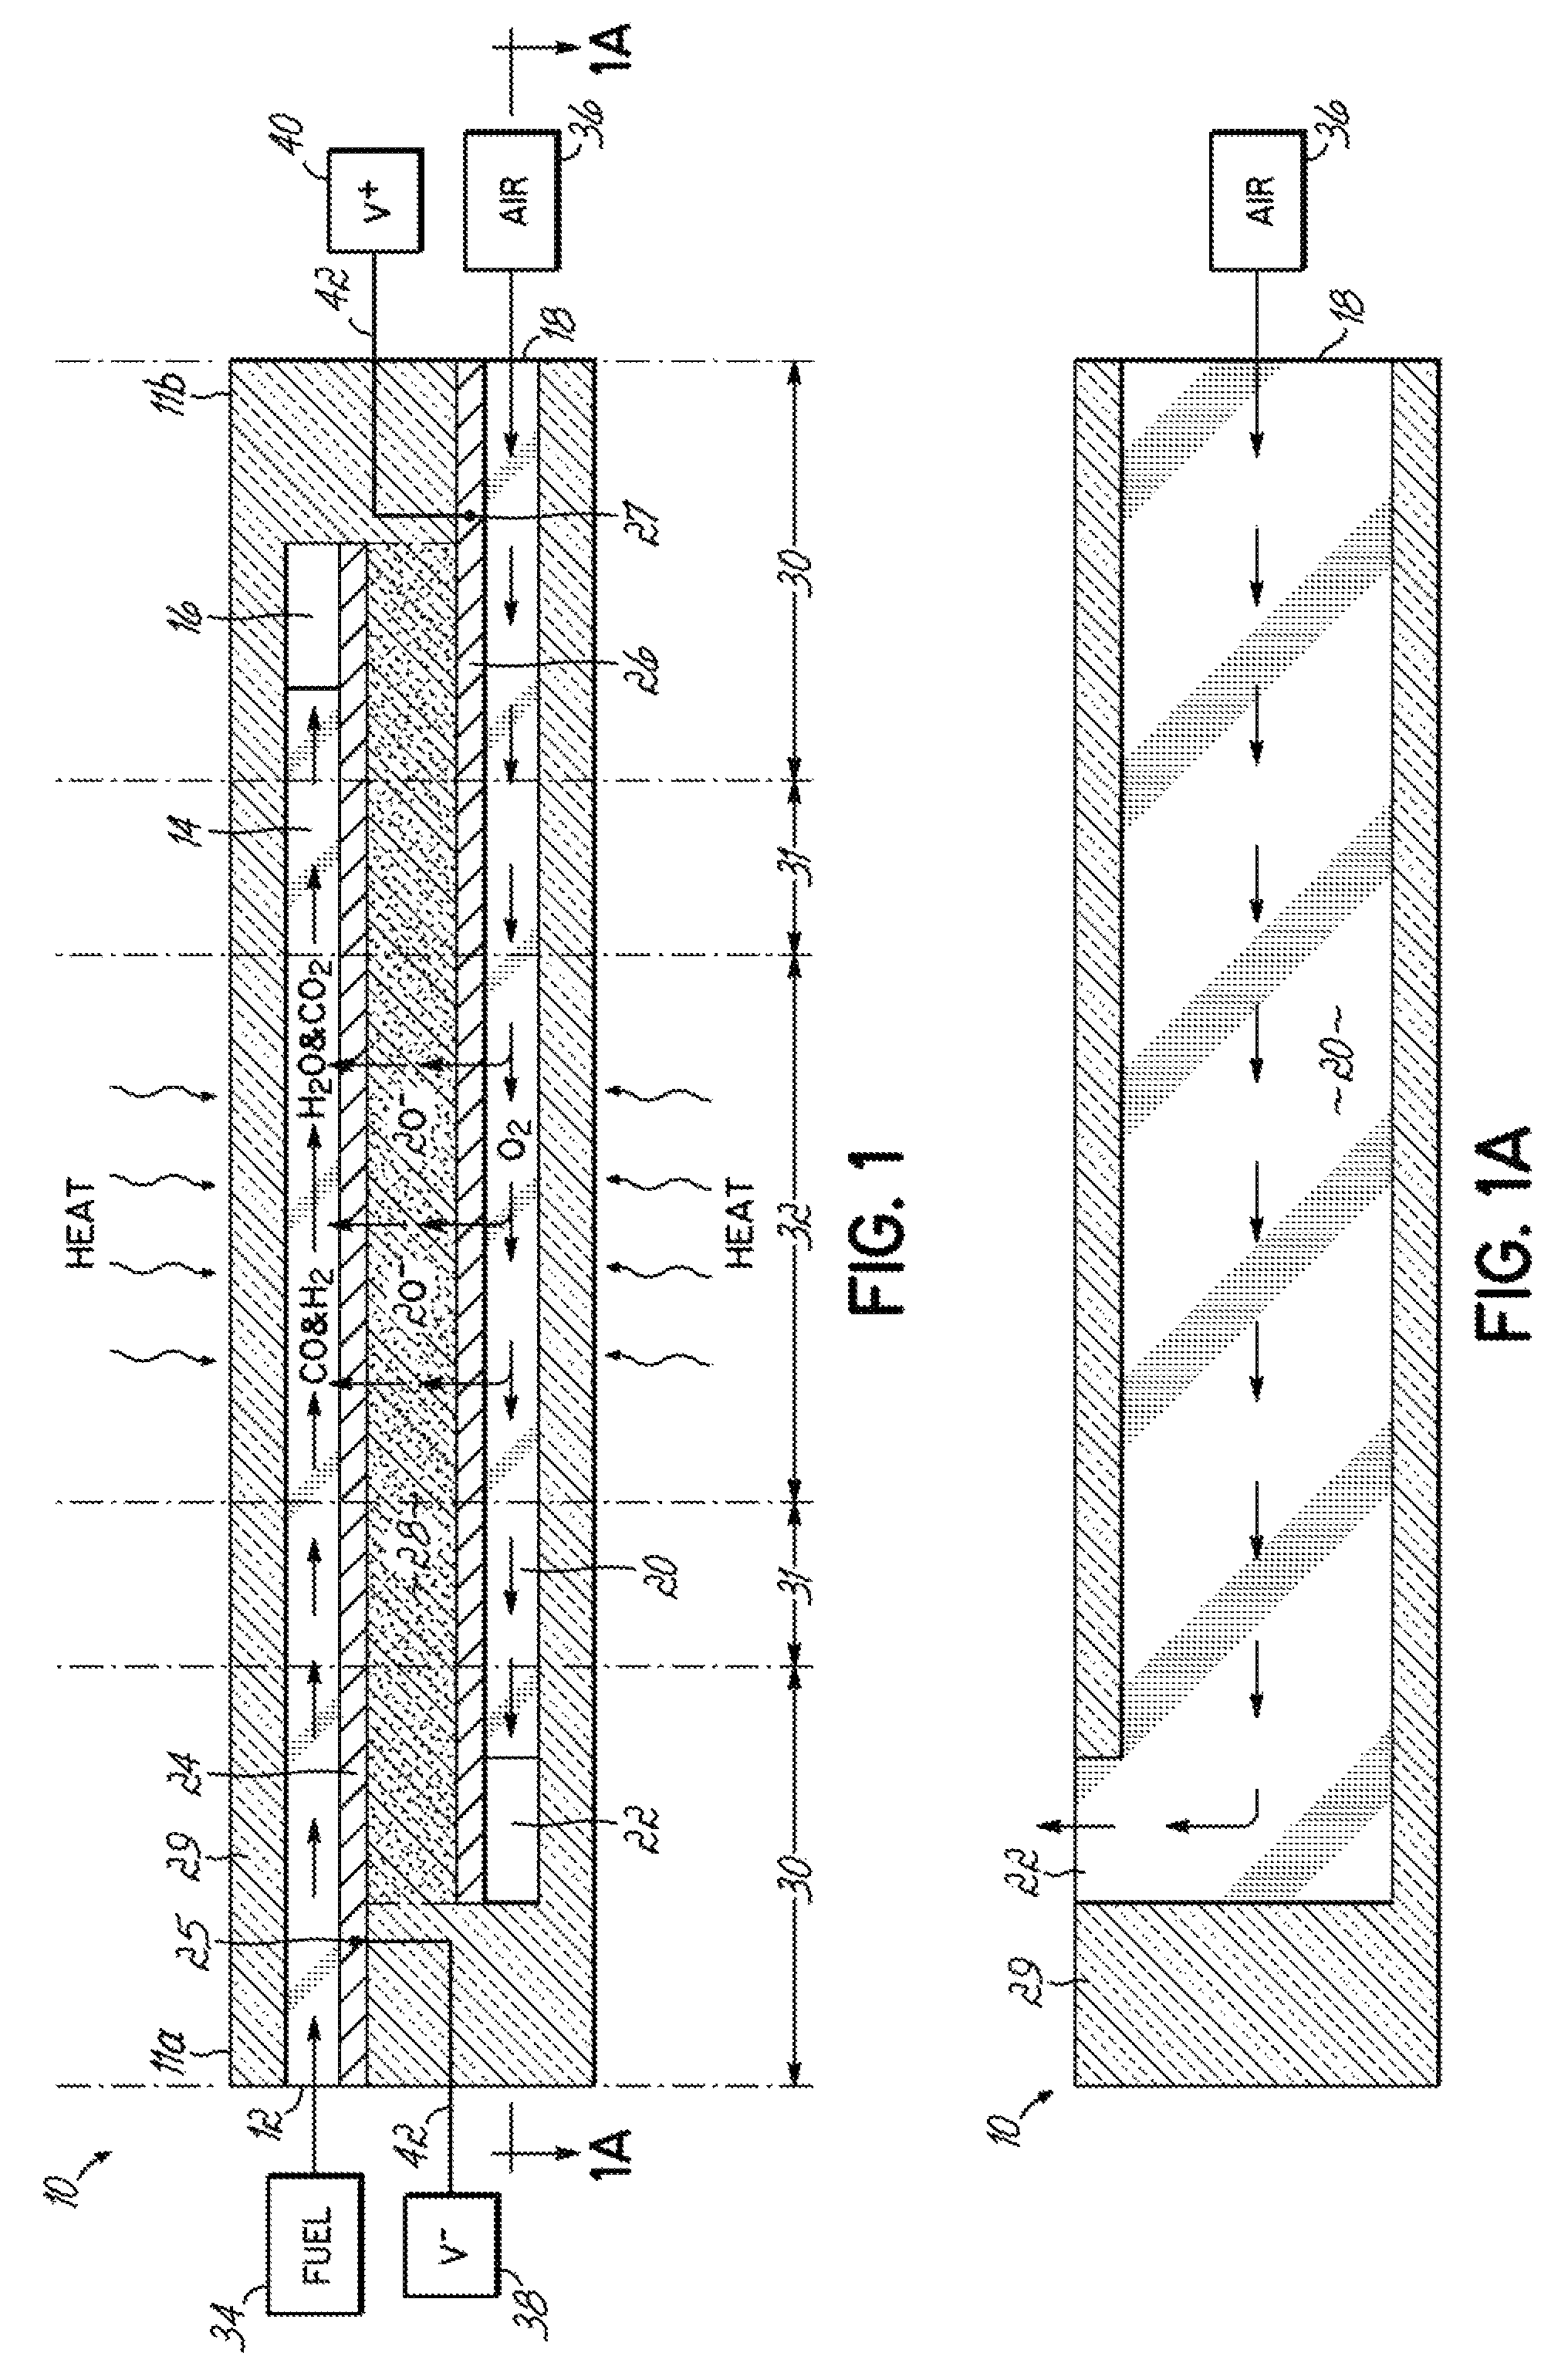 Fuel cell device and system